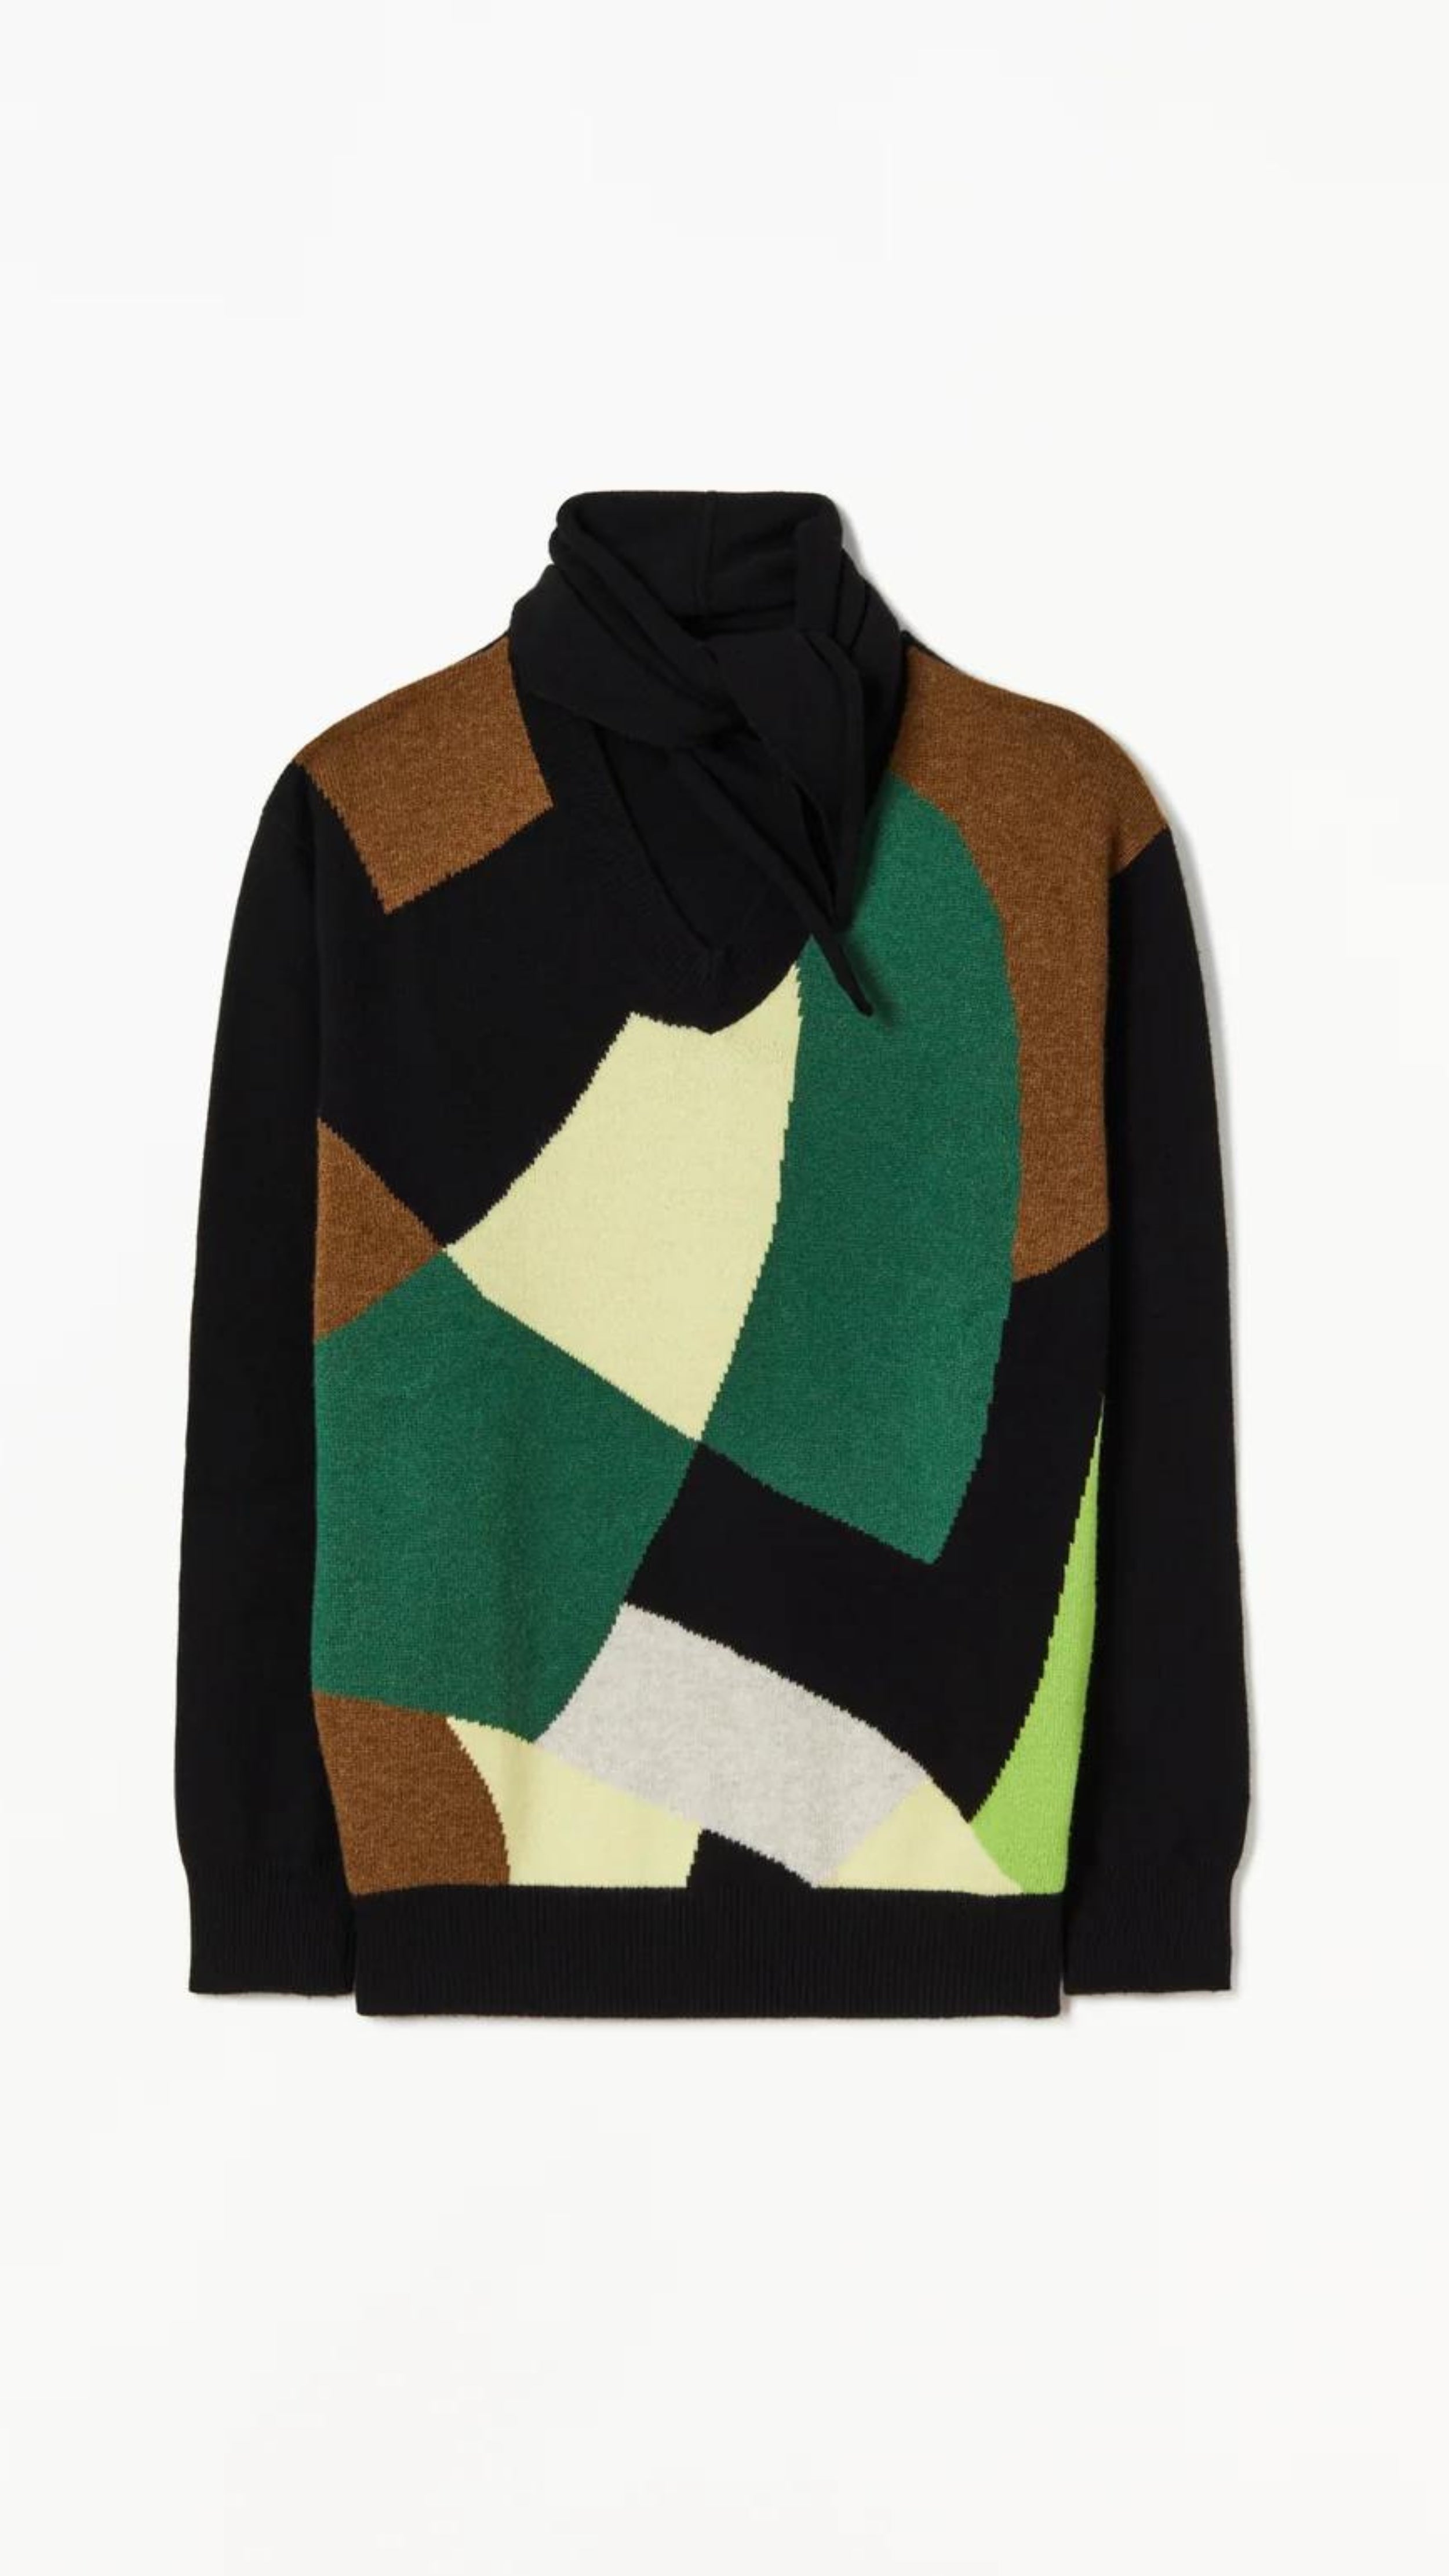 Plan C Color Block Sweater with Scarf. Wool and cashmere blend sweater made in Italy. With Green, pale yellow, ecru and black geometric patterns across the front and a sold black back. Comes with a built in scarf that can be worn tied or open. Shown  facing front.